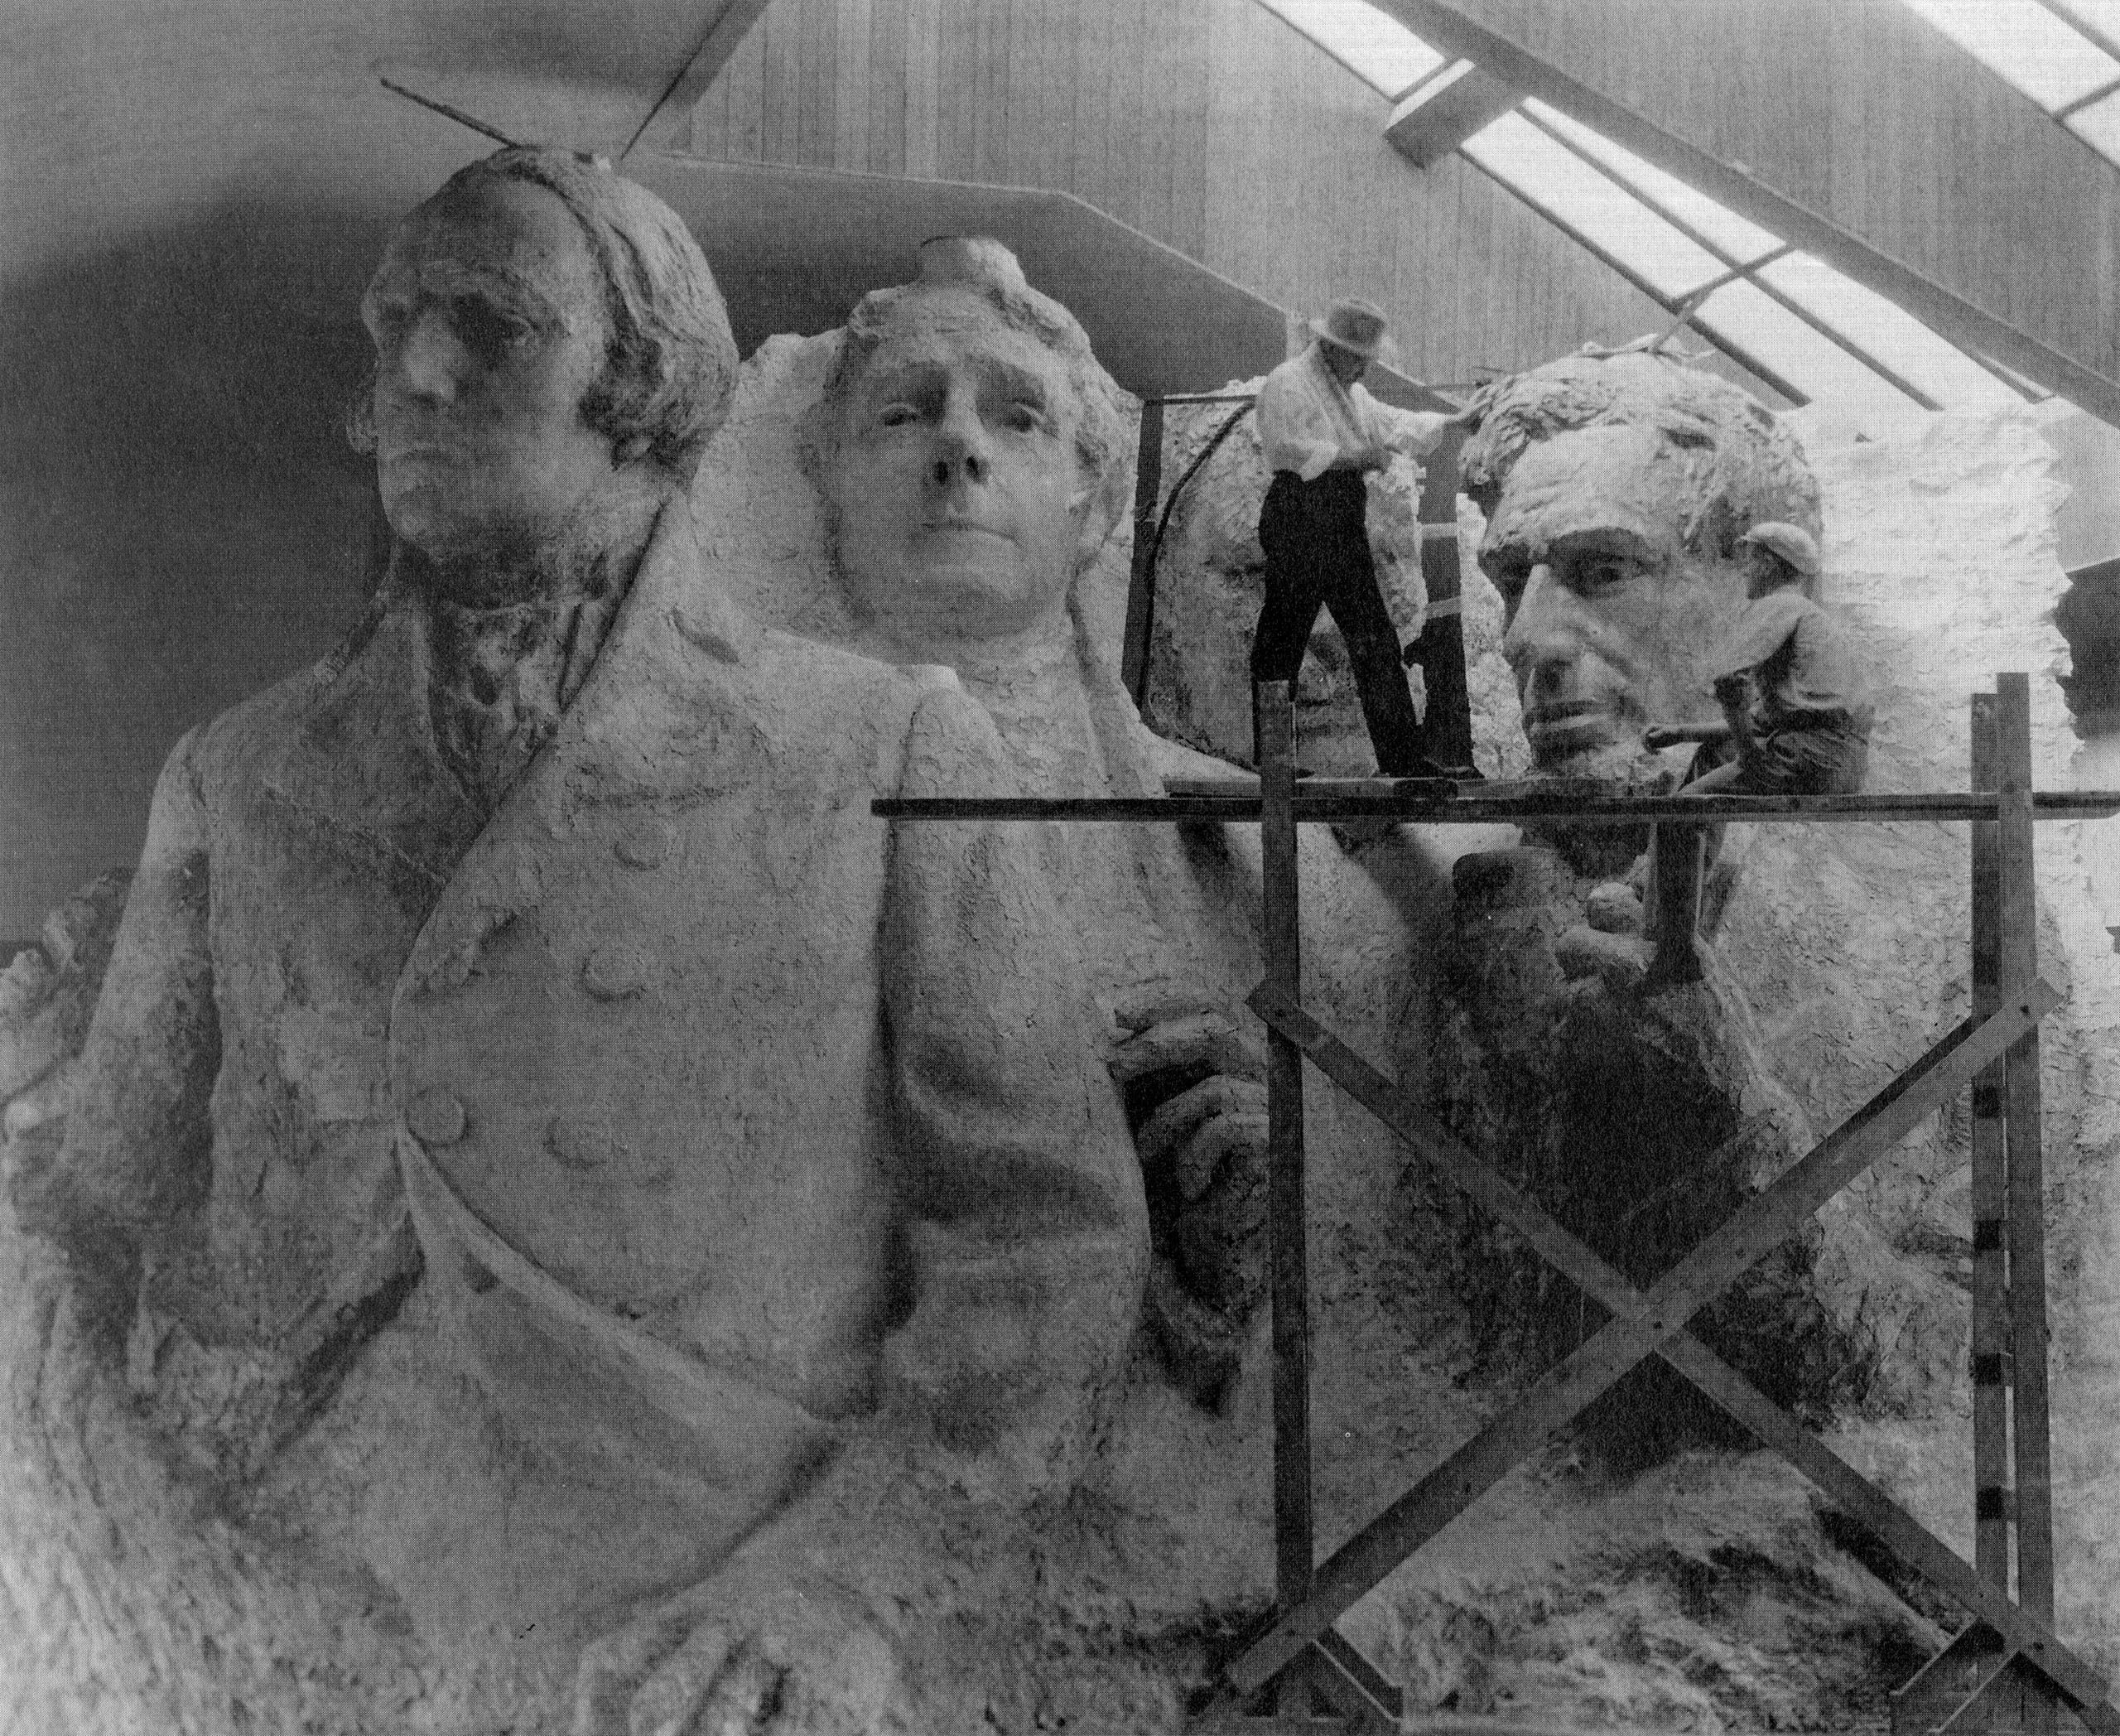 The sculptor of Mount Rushmore, Gutzon Borglum, with a model of the four presidents that included arms and hands.